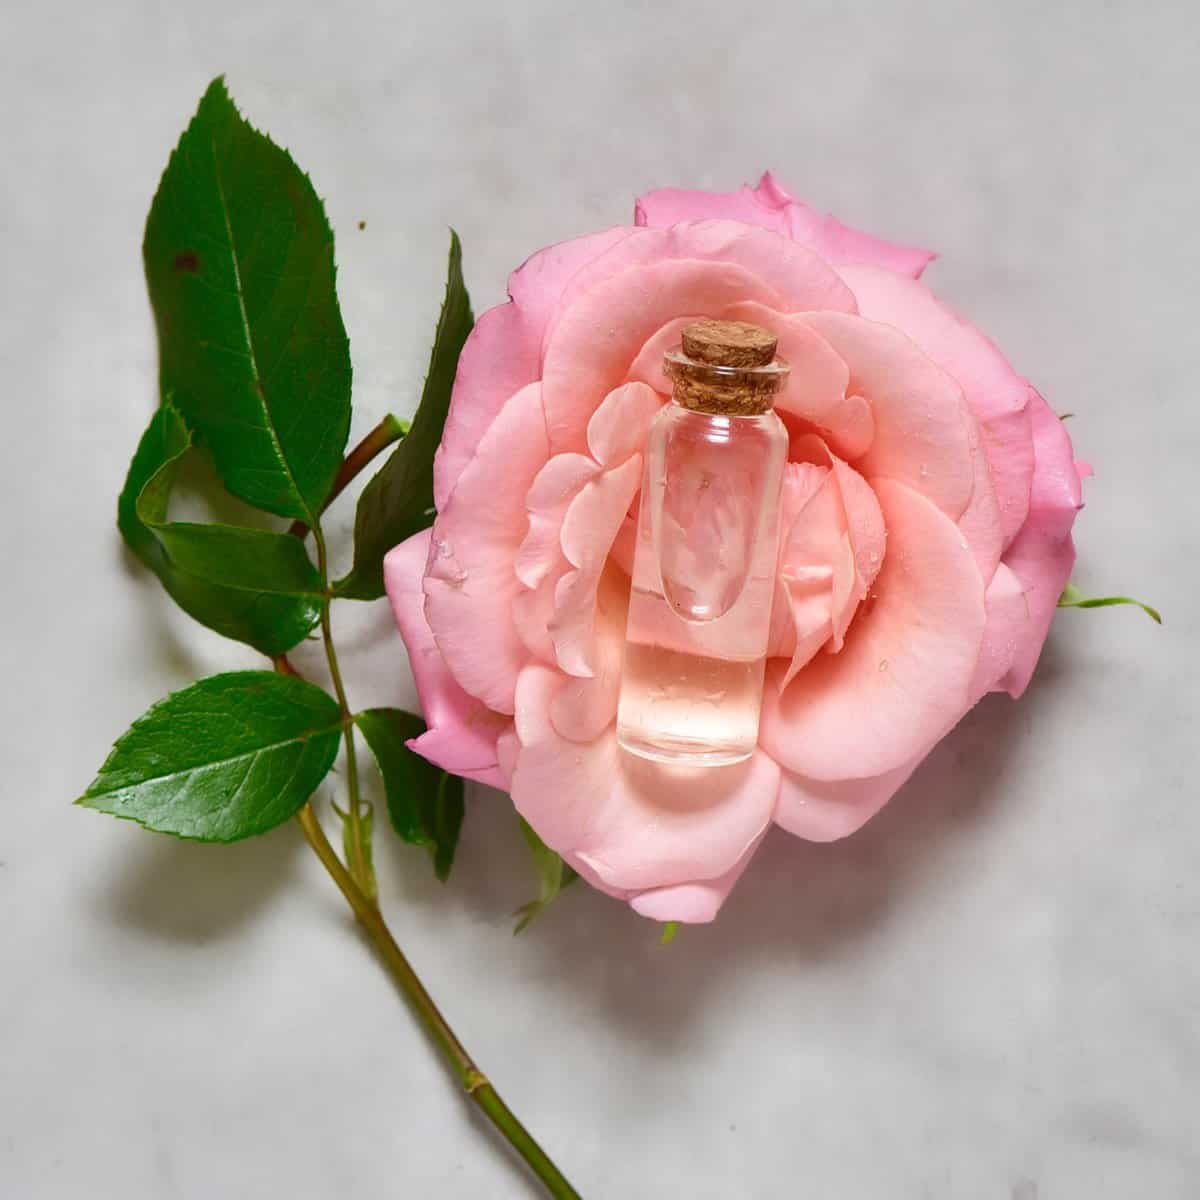 A miniature clear bottle of rose water placed over a rose flower